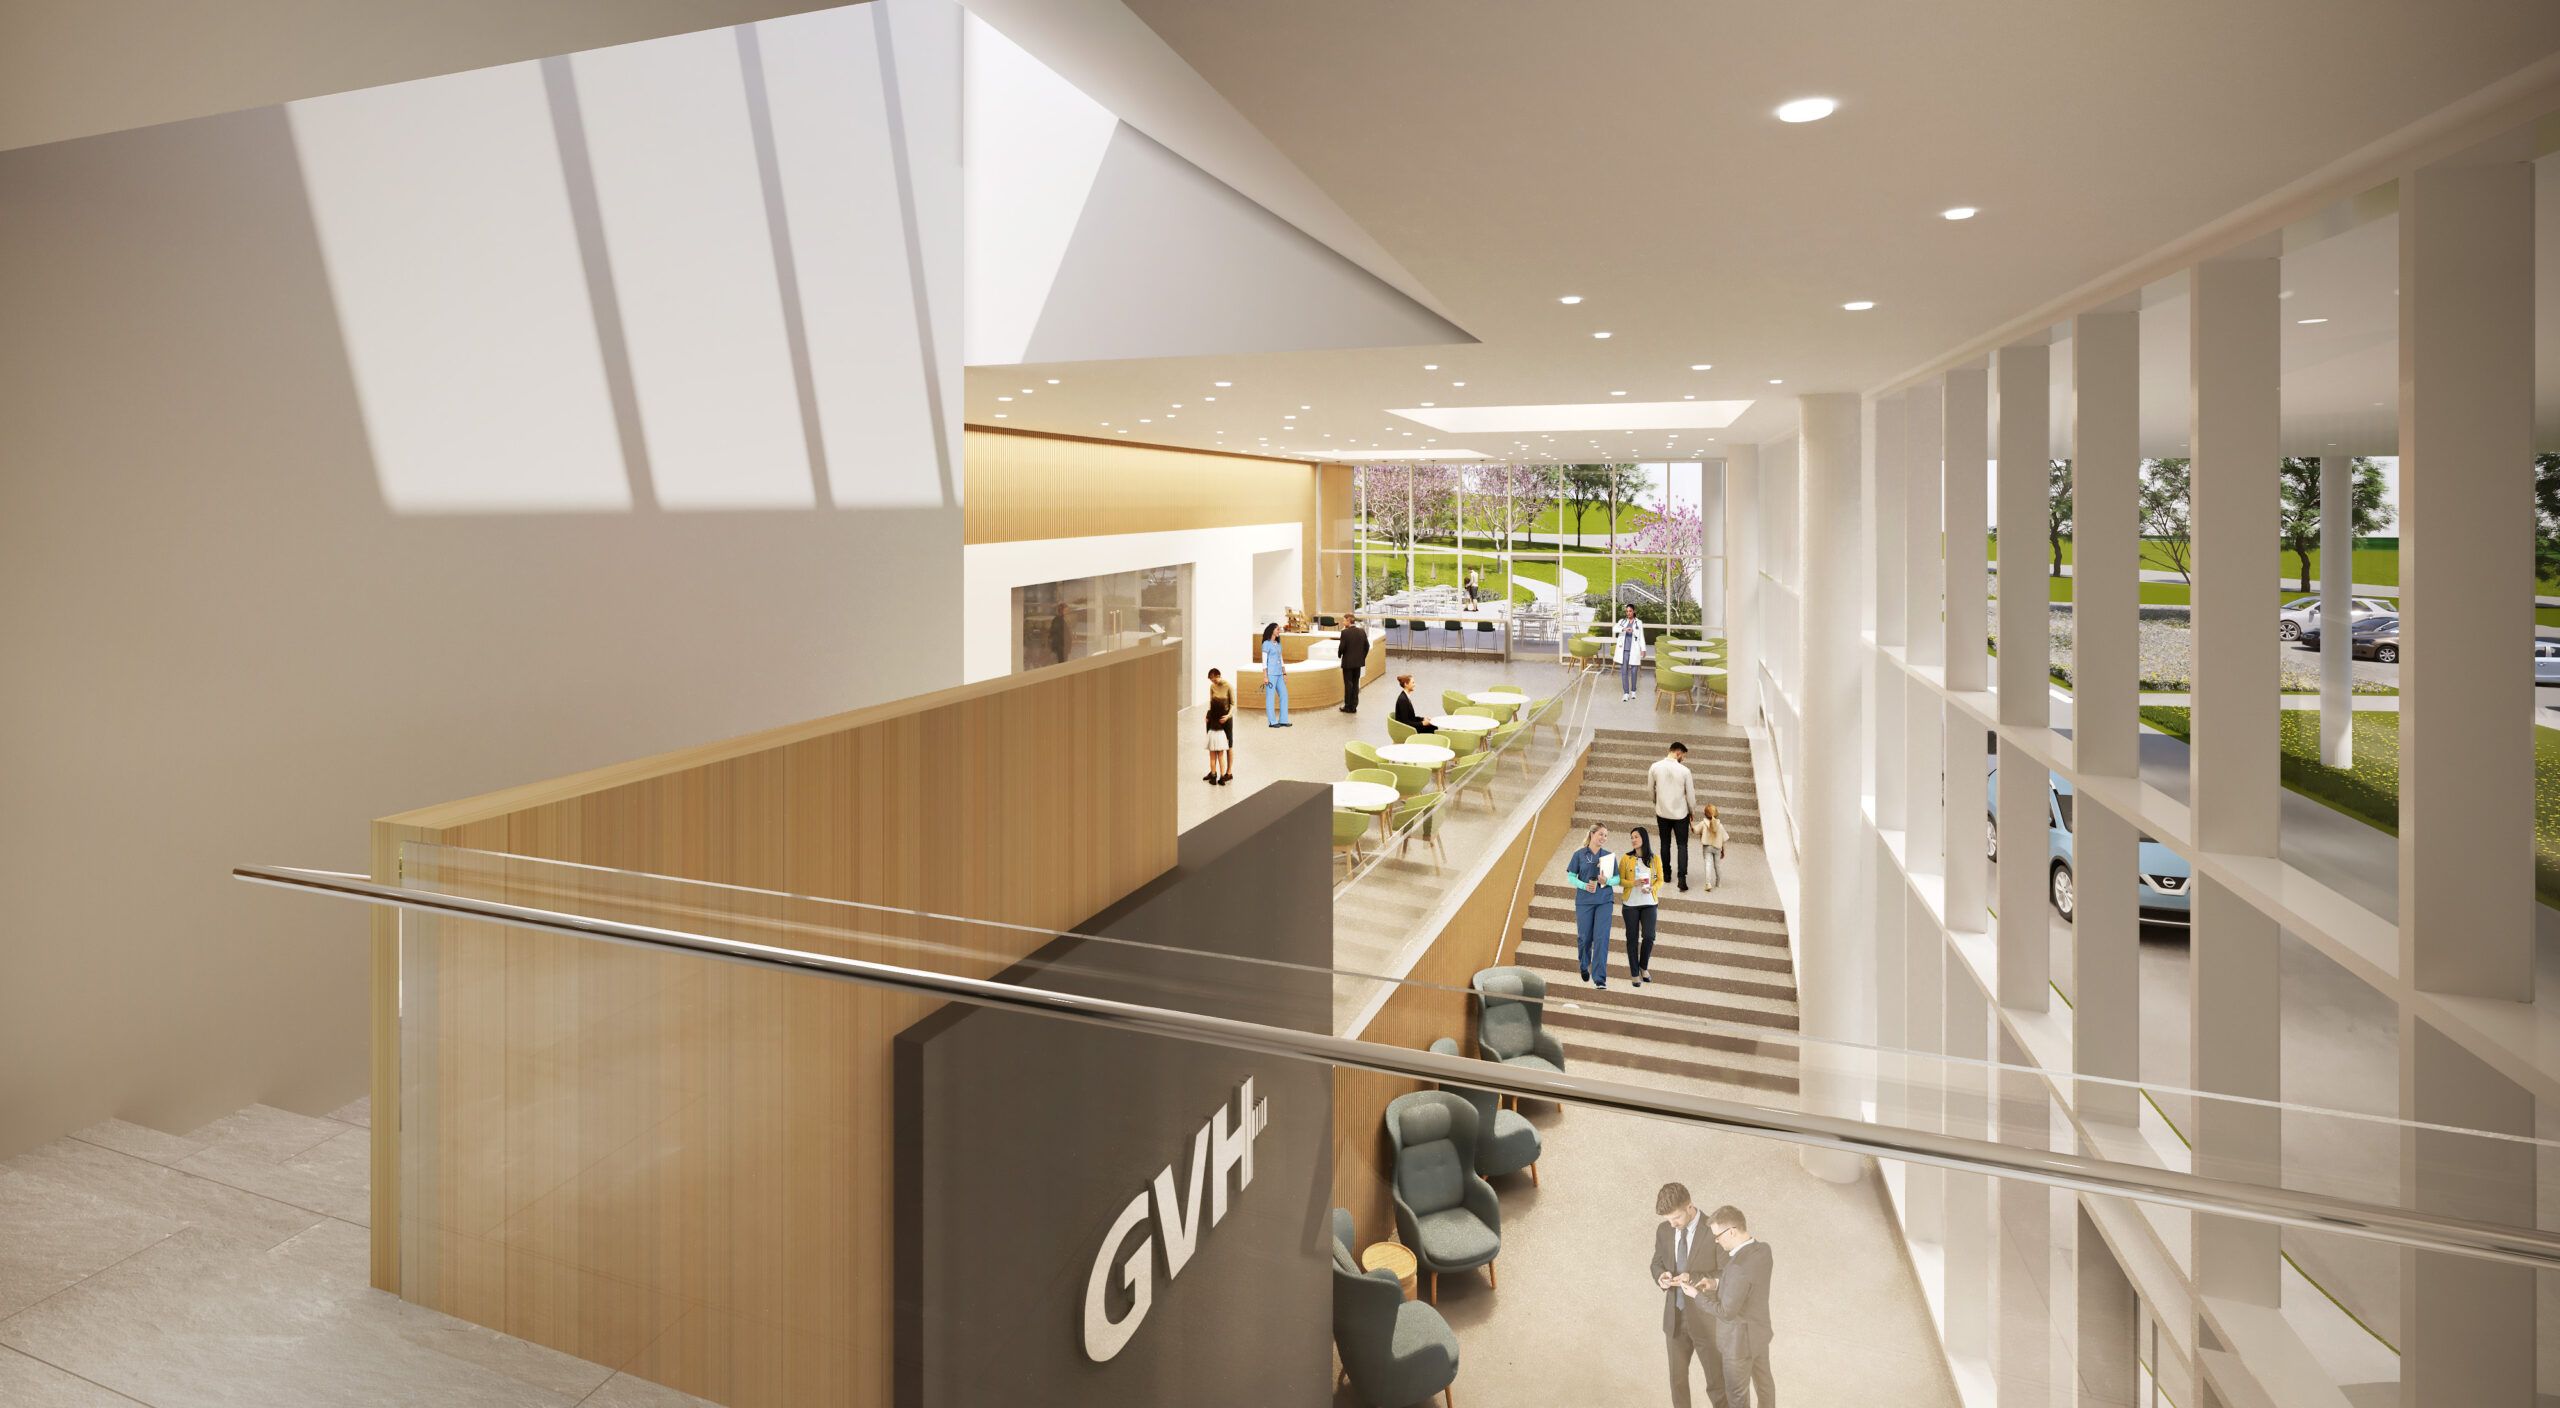 Architectural rendering of the lobby of Grand View Health